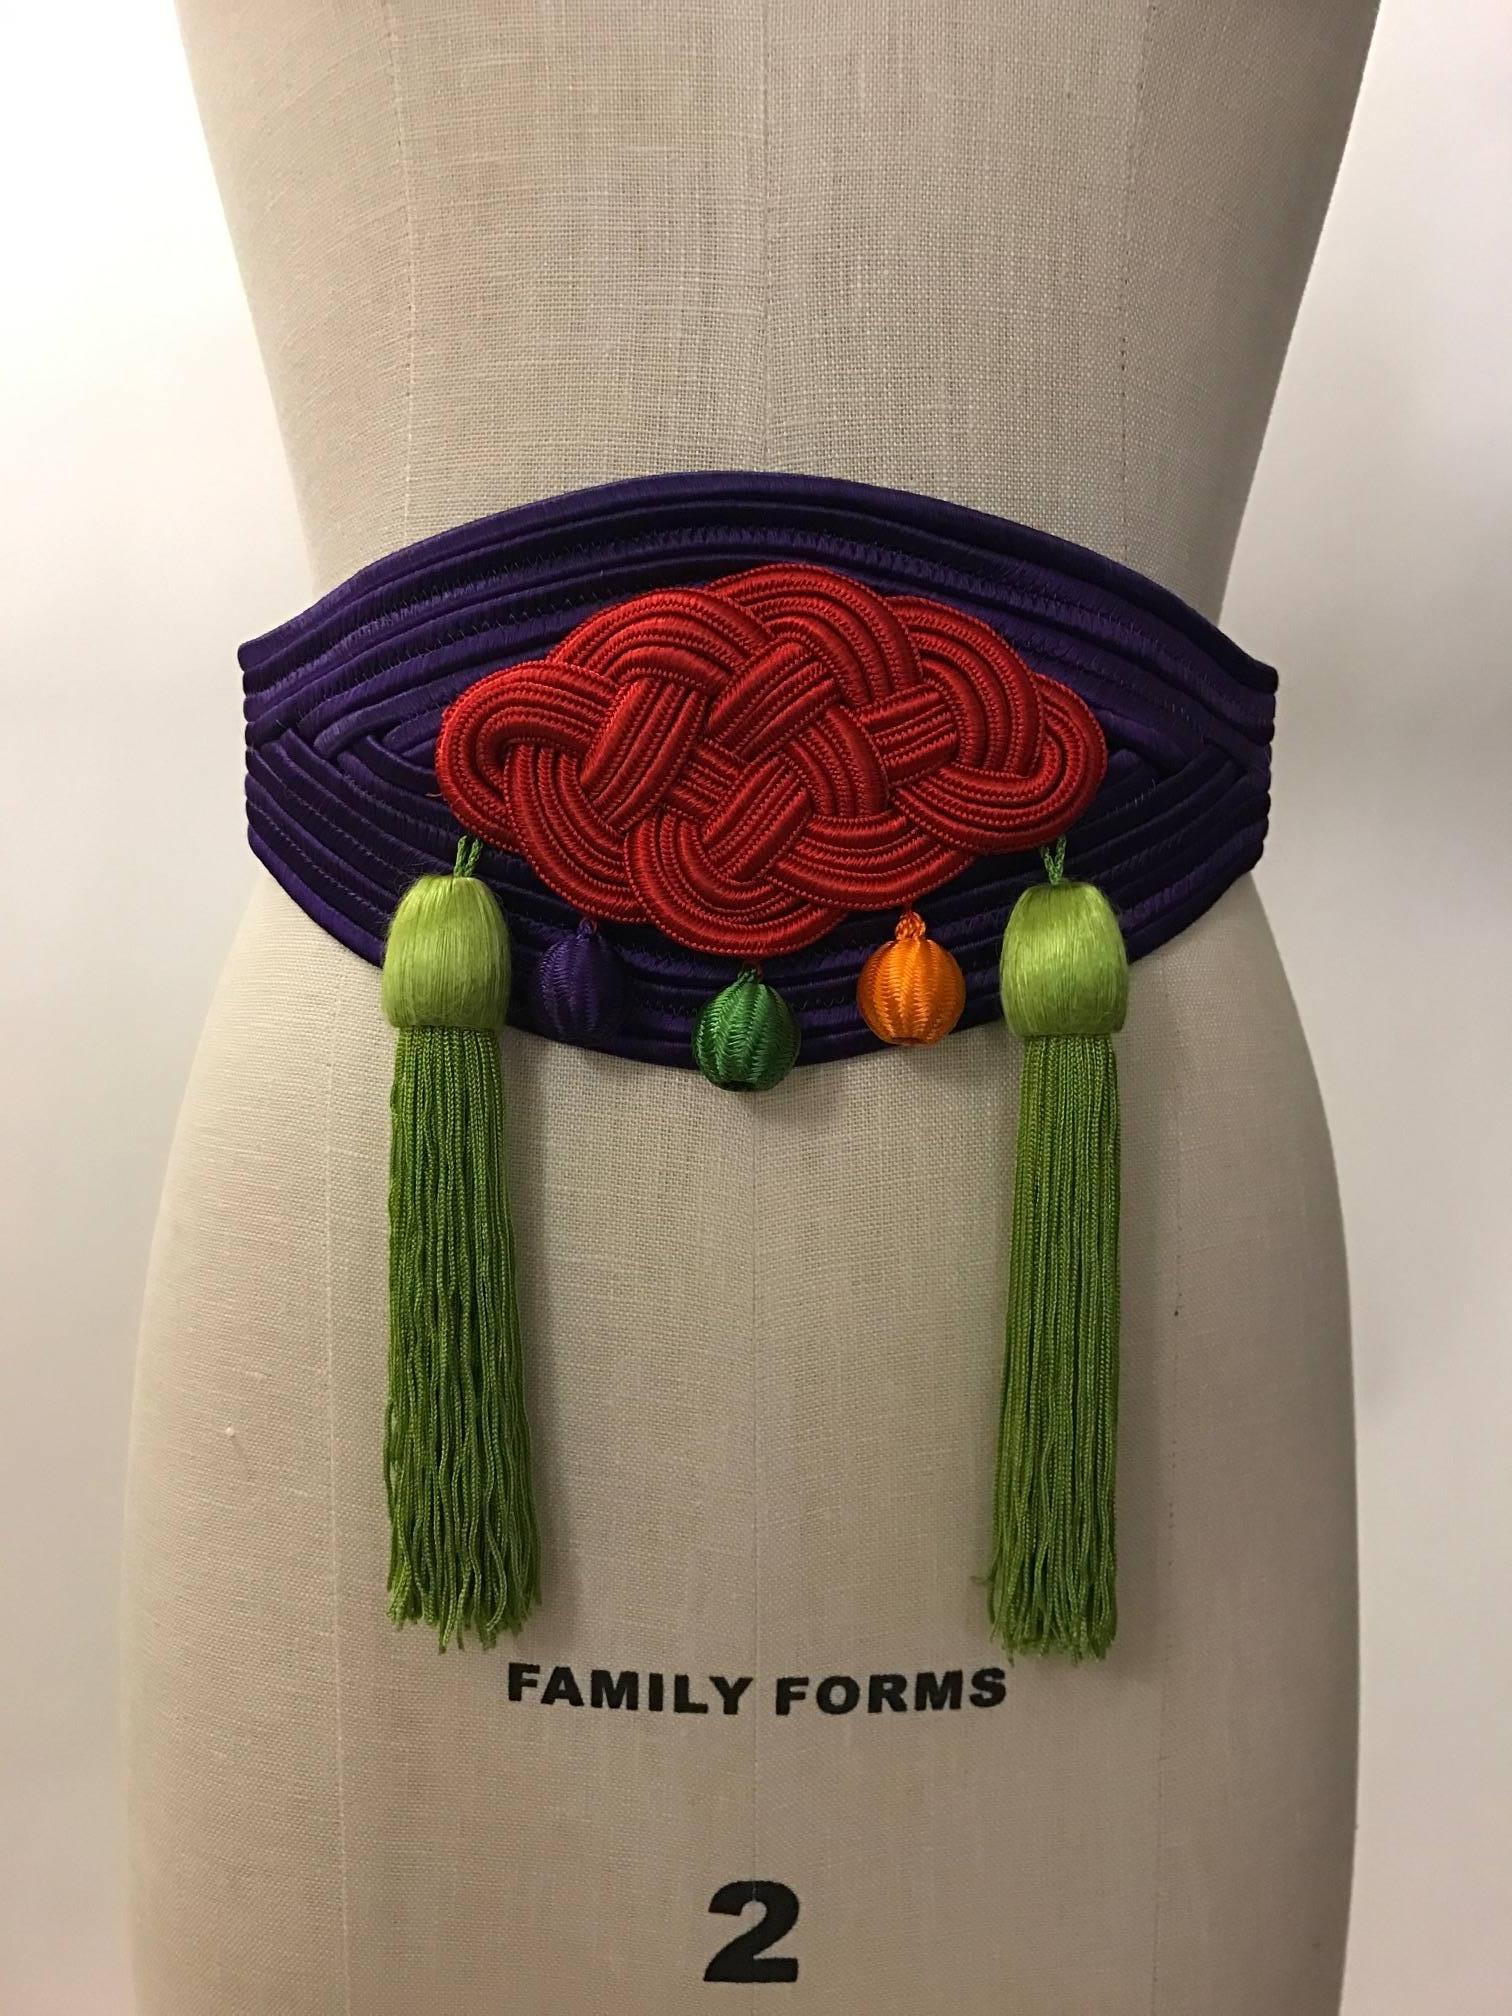 Yves Saint Laurent Rive Gauche vintage purple belt with red, purple, green, and orange multicolored embellishments. Fastens at back with snap and hook.

Best fits around a 26